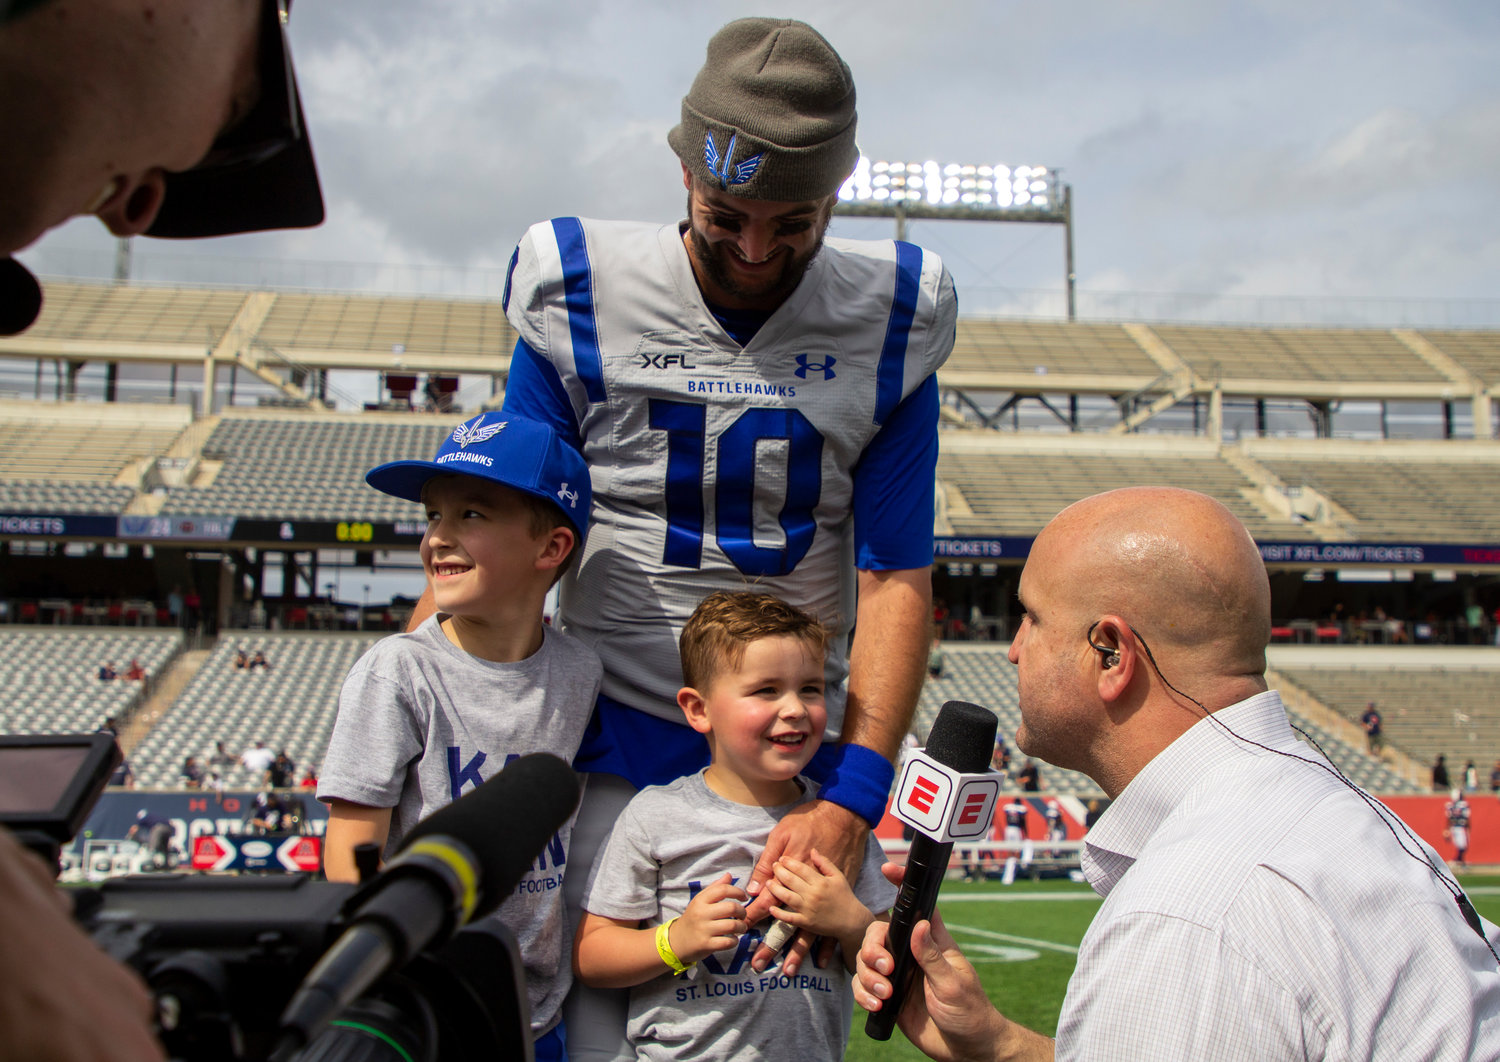 ESPN’s Cole Cubelic interviews Battlehawks quarterback AJ McCarron and his sons Cash and Gunnar after St. Louis’ victory at Houston’s TDECU Stadium Sunday, April 2. McCarron said priceless moments like these are the reason why he came back to play in the XFL instead of a higher-paying job in the NFL.